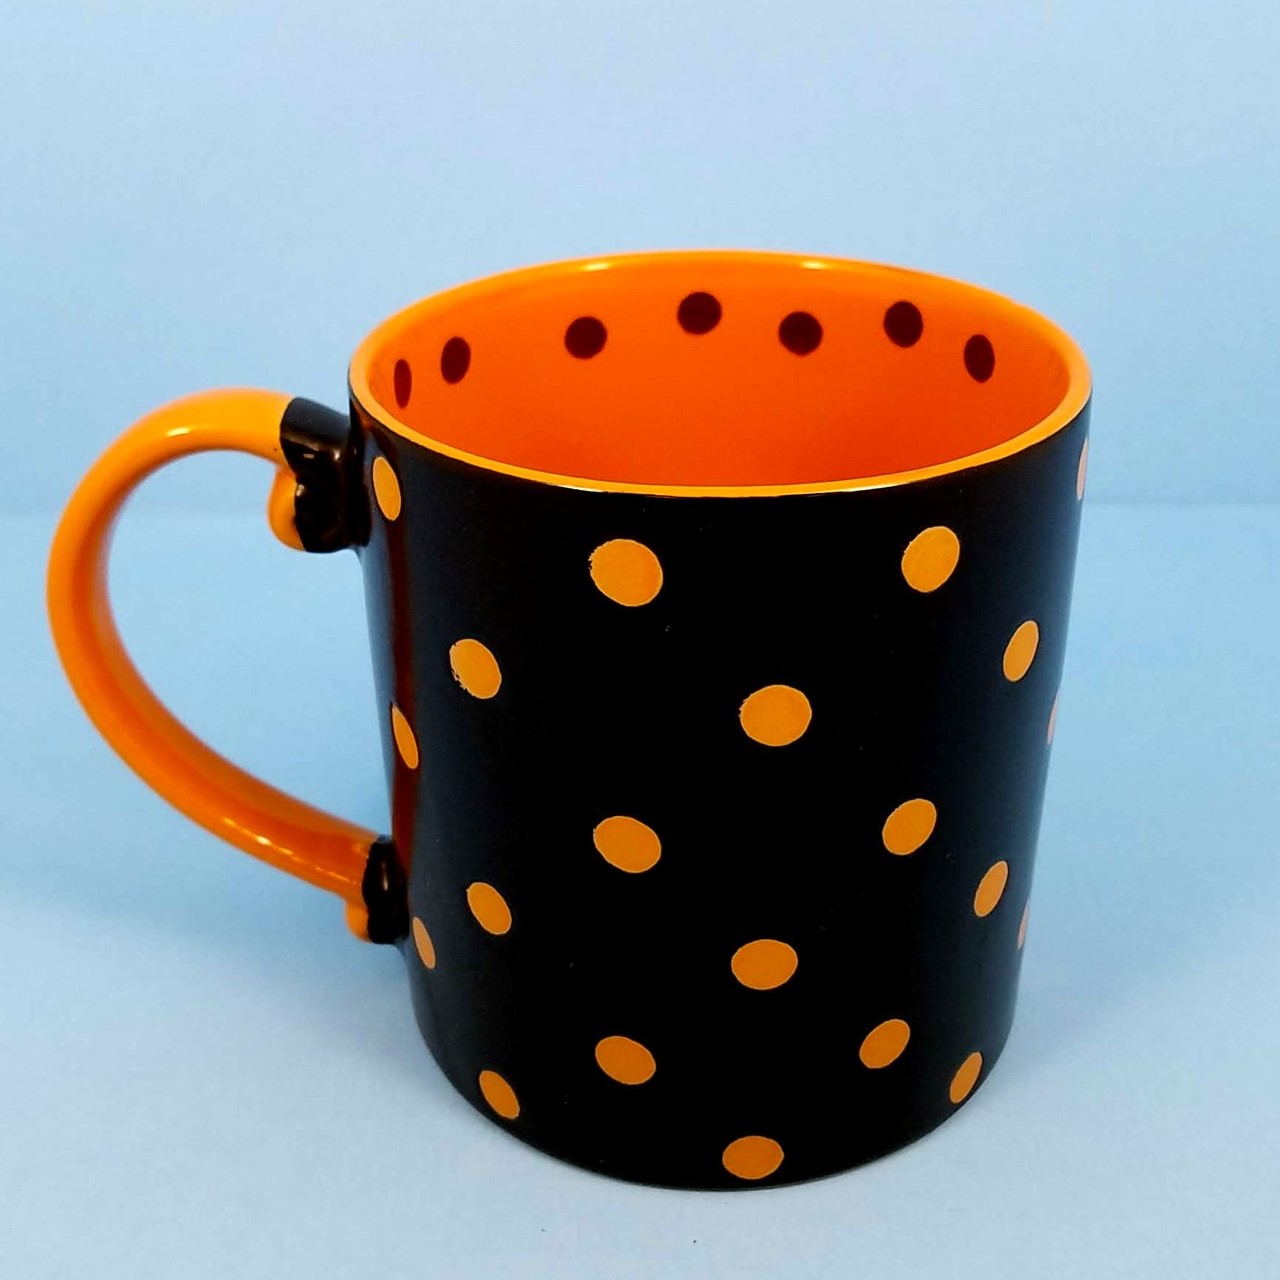 This Halloween Cat Mug Cup Black & Orange Pen Pencil or Plant Holder 21oz (596ml) is made with love by Premier Homegoods! Shop more unique gift ideas today with Spots Initiatives, the best way to support creators.